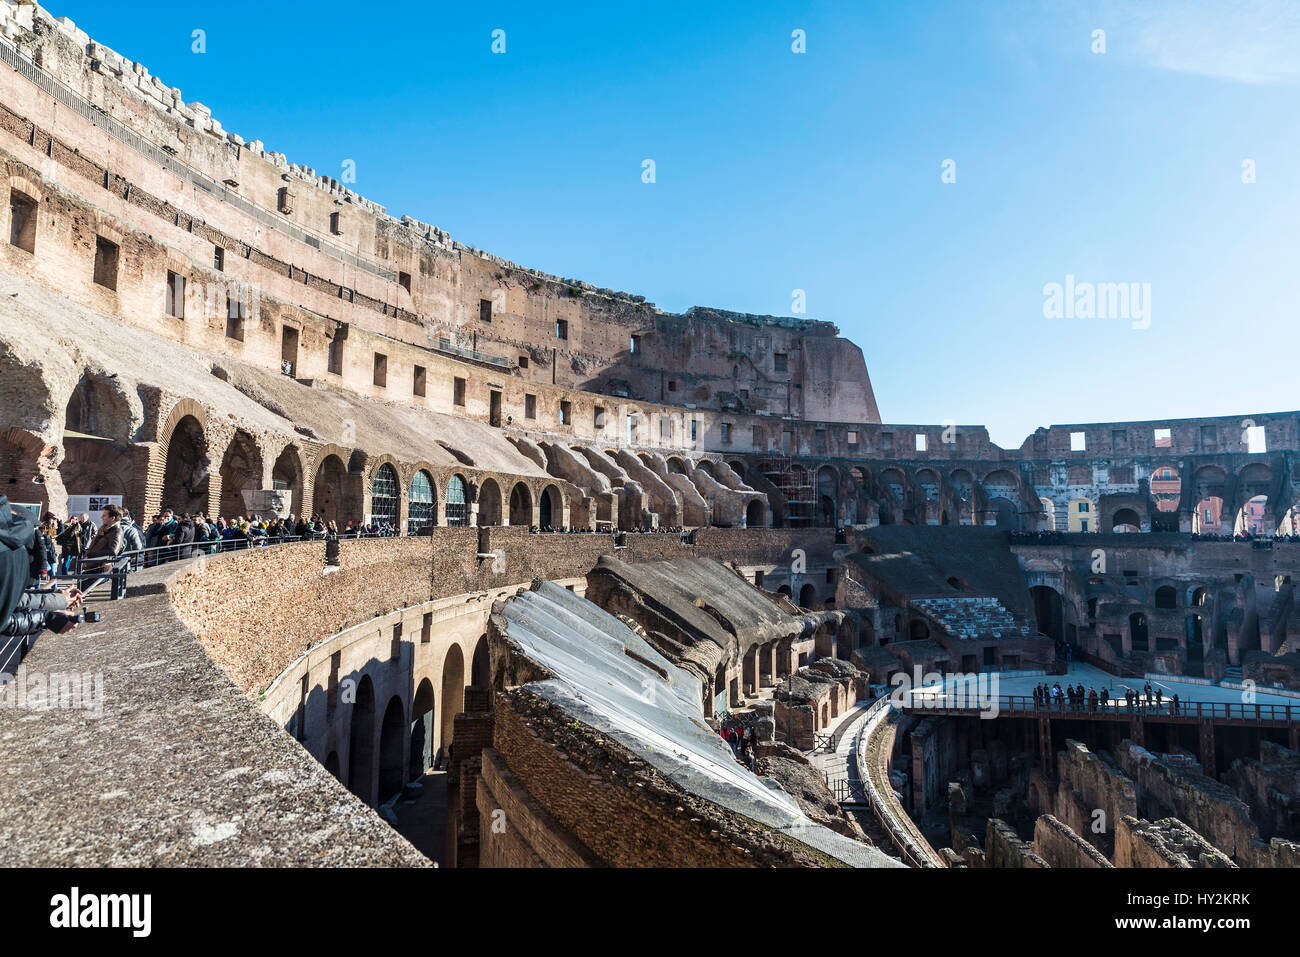 Rome, Italy - December 31, 2016: View of coliseum of Rome full of tourists in Italy Stock Photo